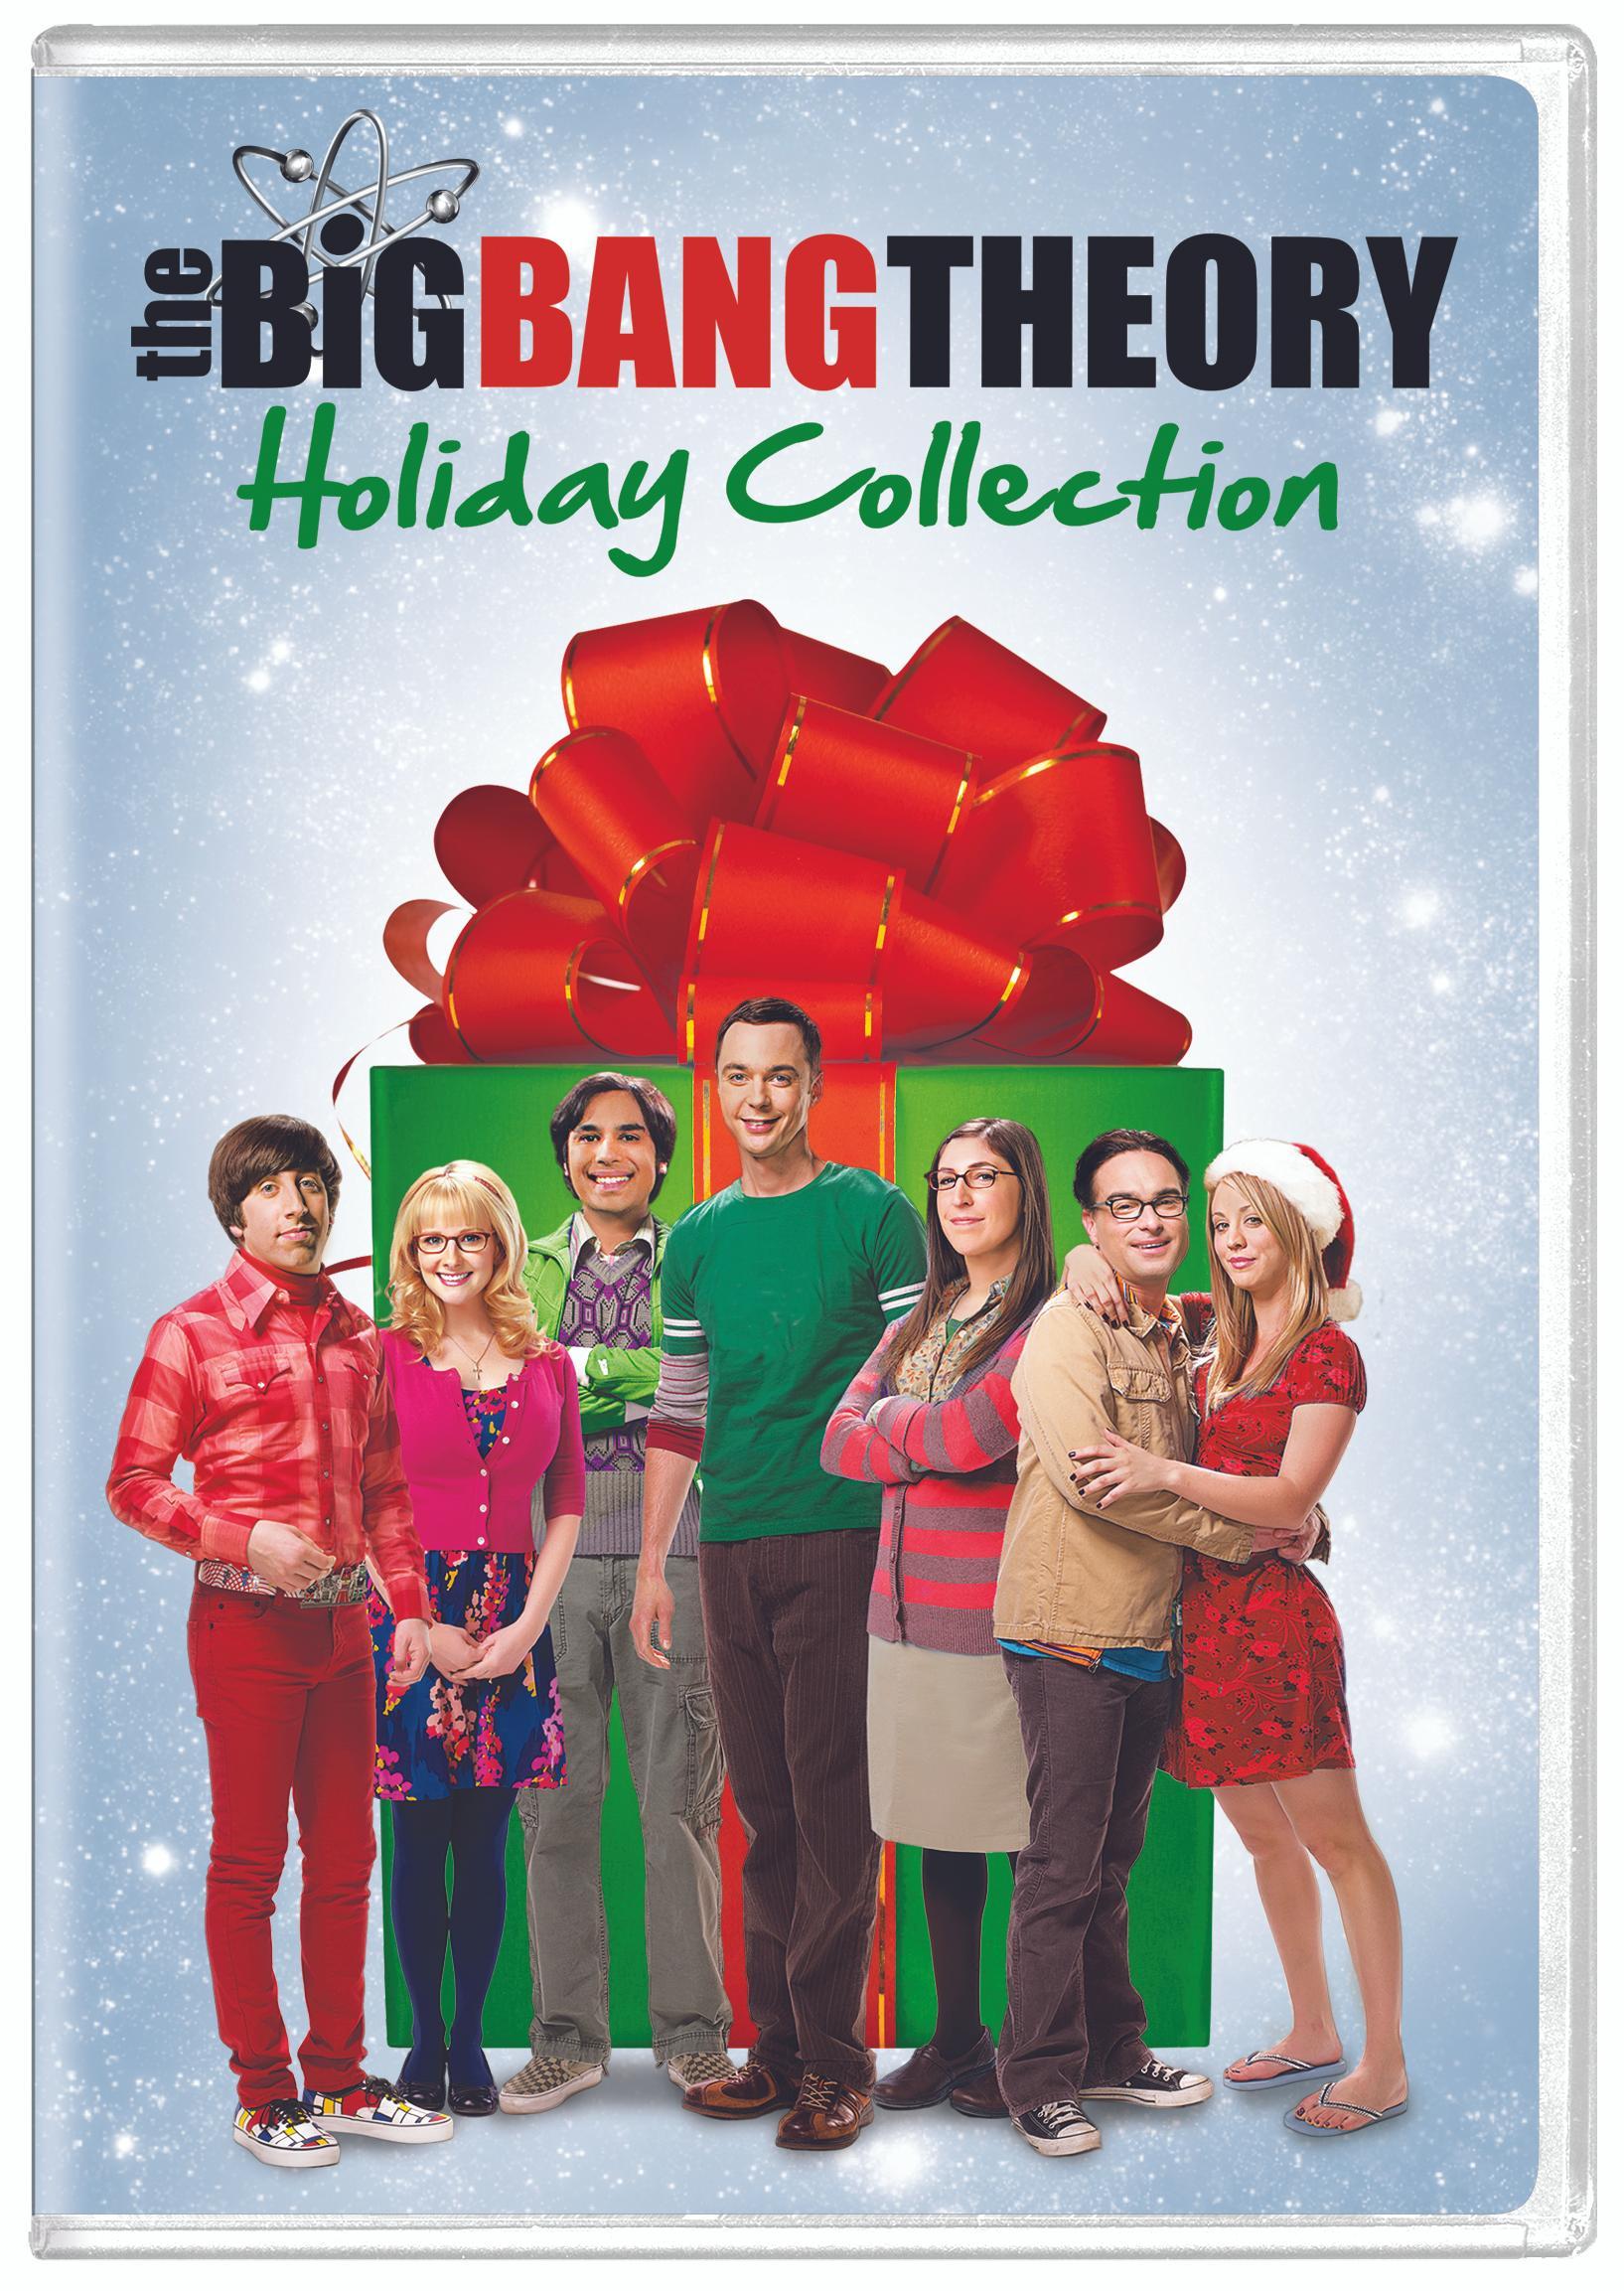 The Big Bang Theory: The Holiday Collection - DVD [ 2022 ]  - Comedy Television On DVD - TV Shows On GRUV